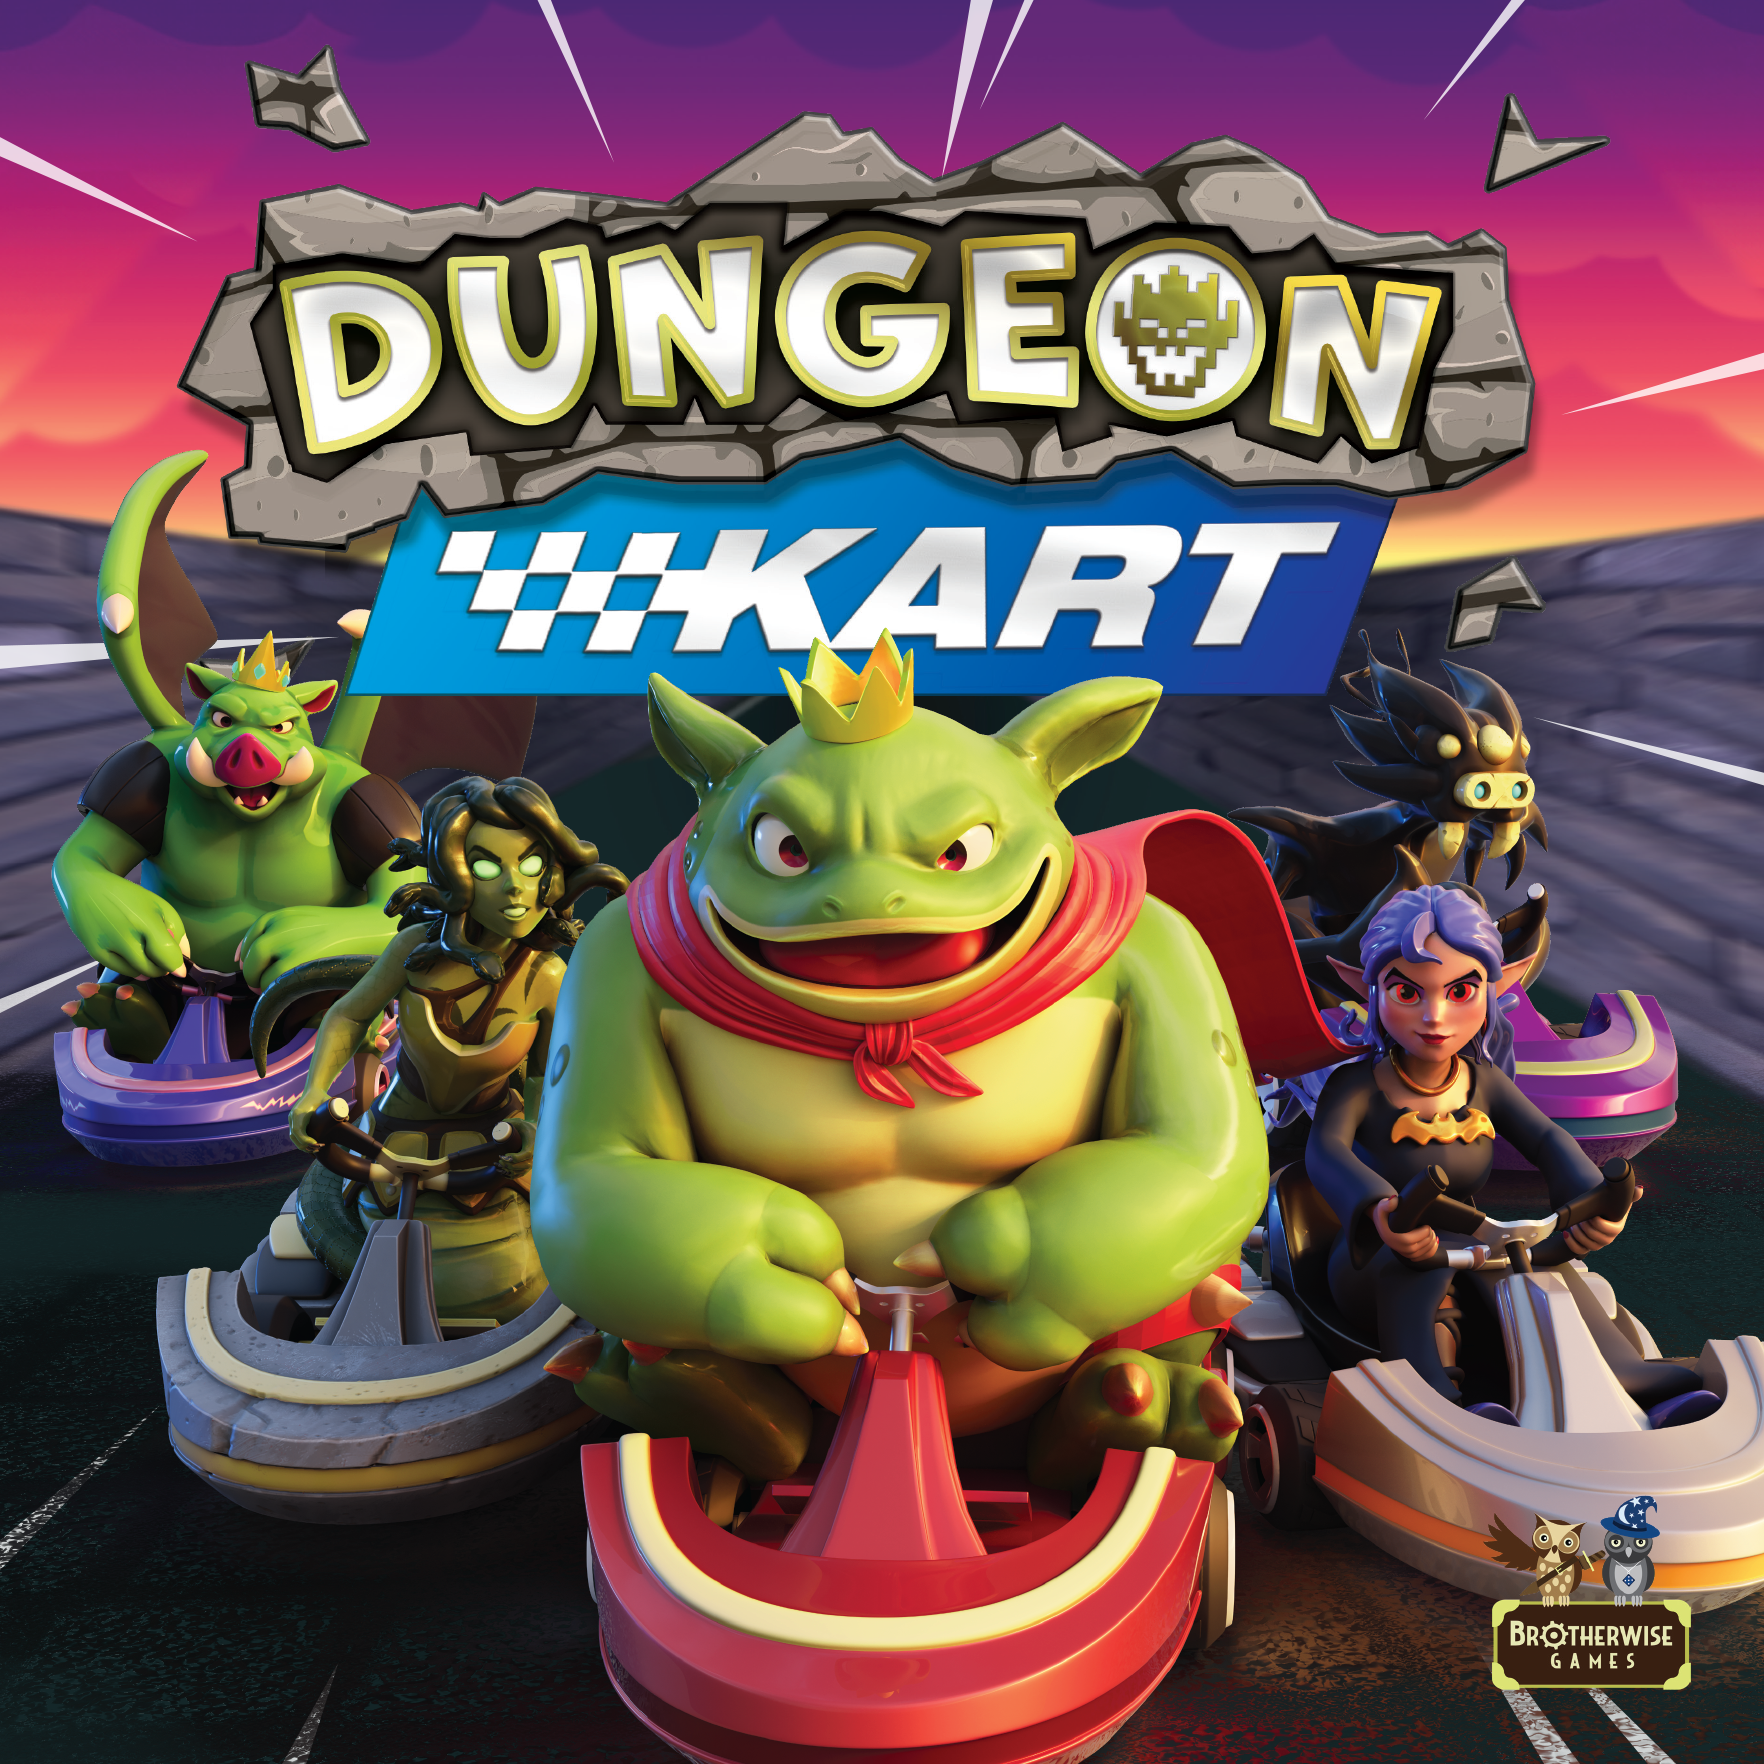 dungeon kart main image with the main boss monster in front driving a go kart.